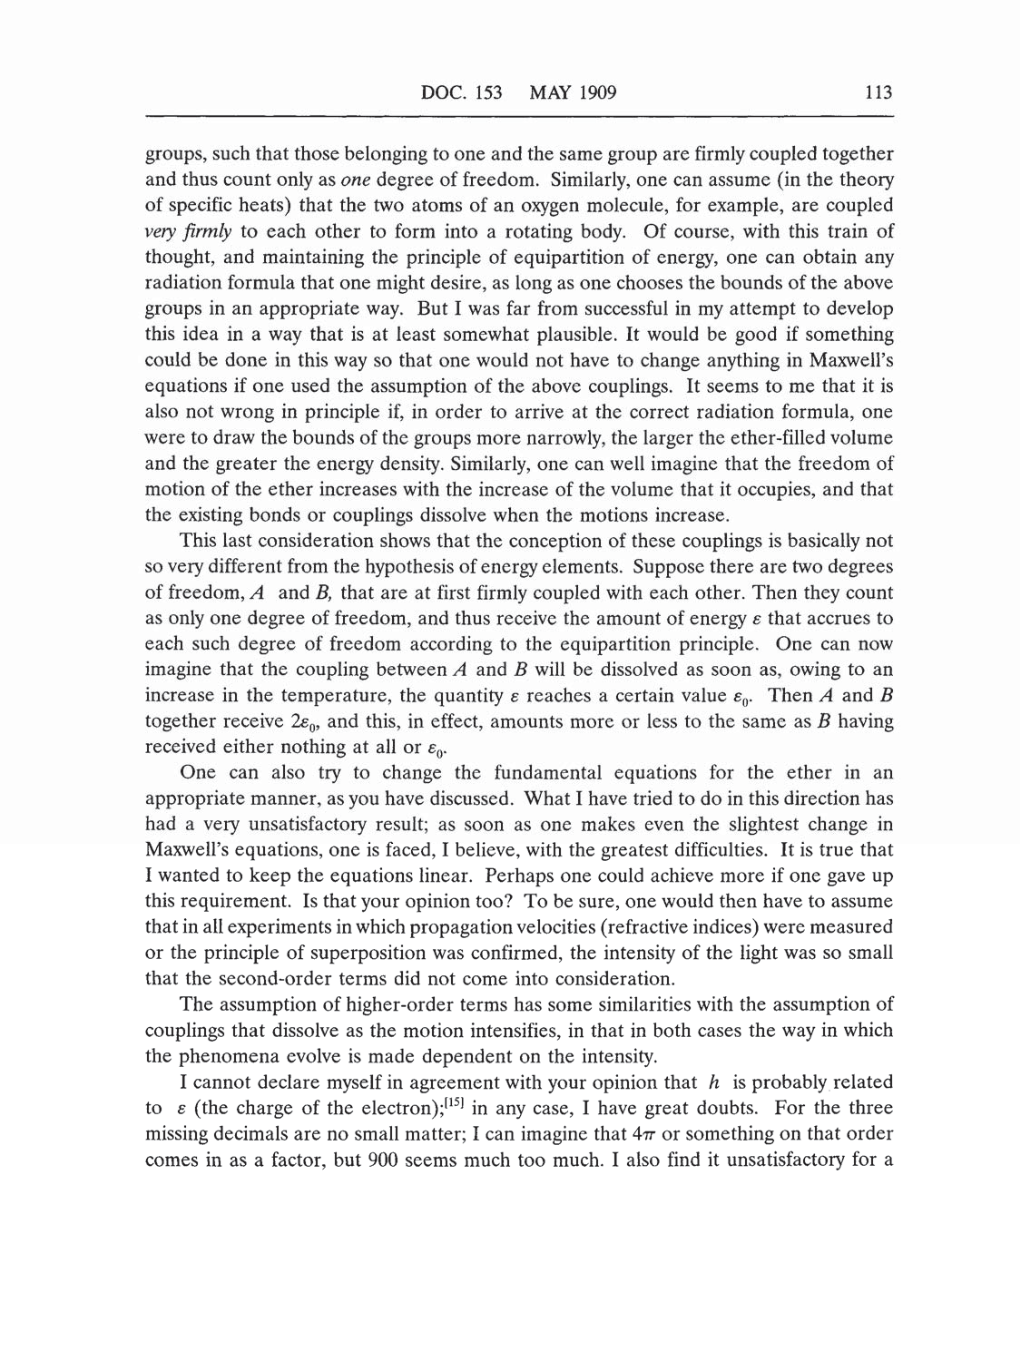 Volume 5: The Swiss Years: Correspondence, 1902-1914 (English translation supplement) page 113